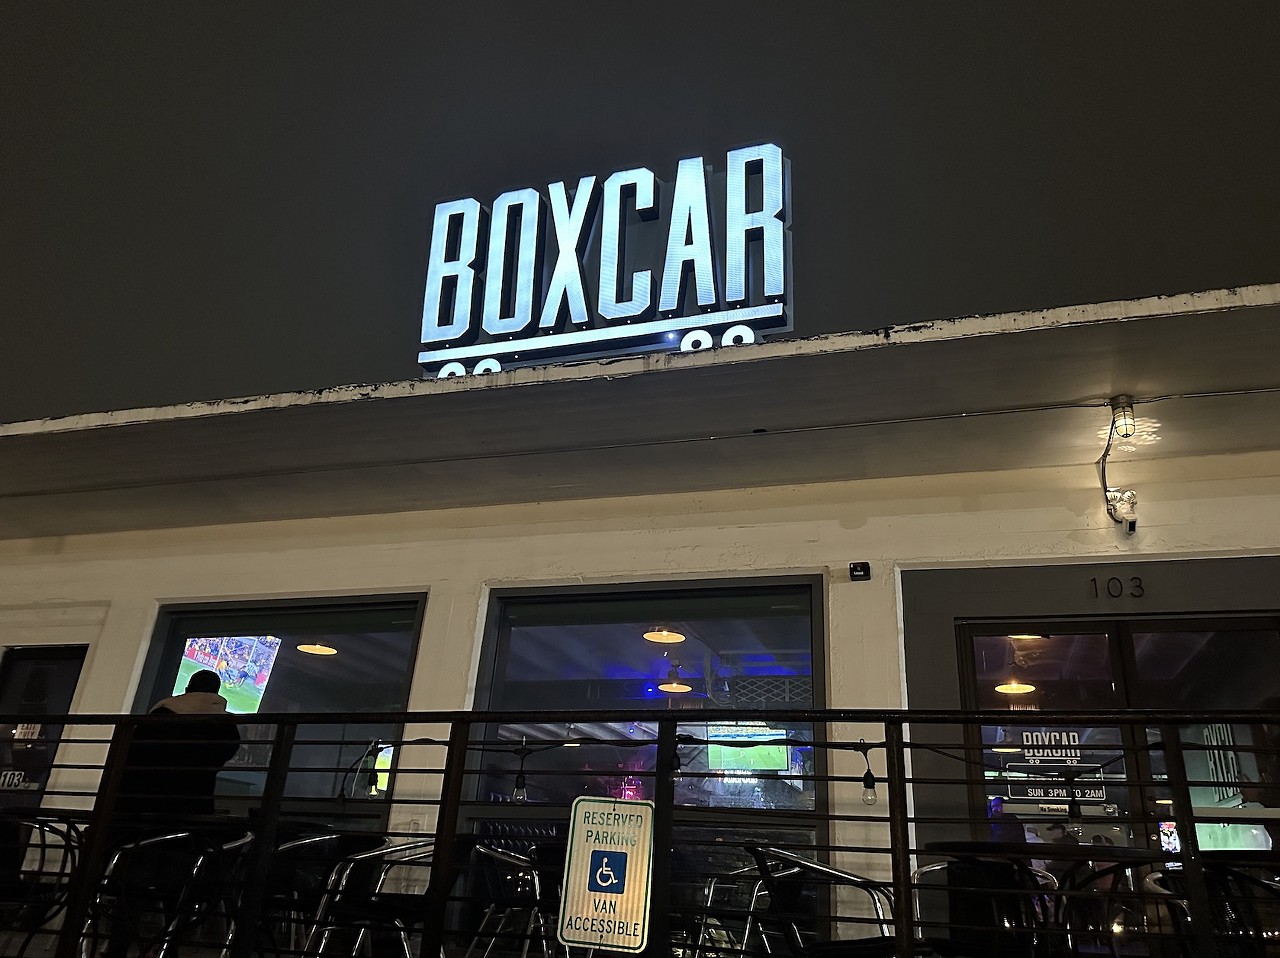 Boxcar Bar
125 Lamar St., (210) 265-3860, facebook.com/boxcarbarsatx
This sexy craft-cocktail spot located east of downtown has a laid back vibe, featuring live DJs and themed parties — the perfect place for silver-tongued visitors to talk someone up.